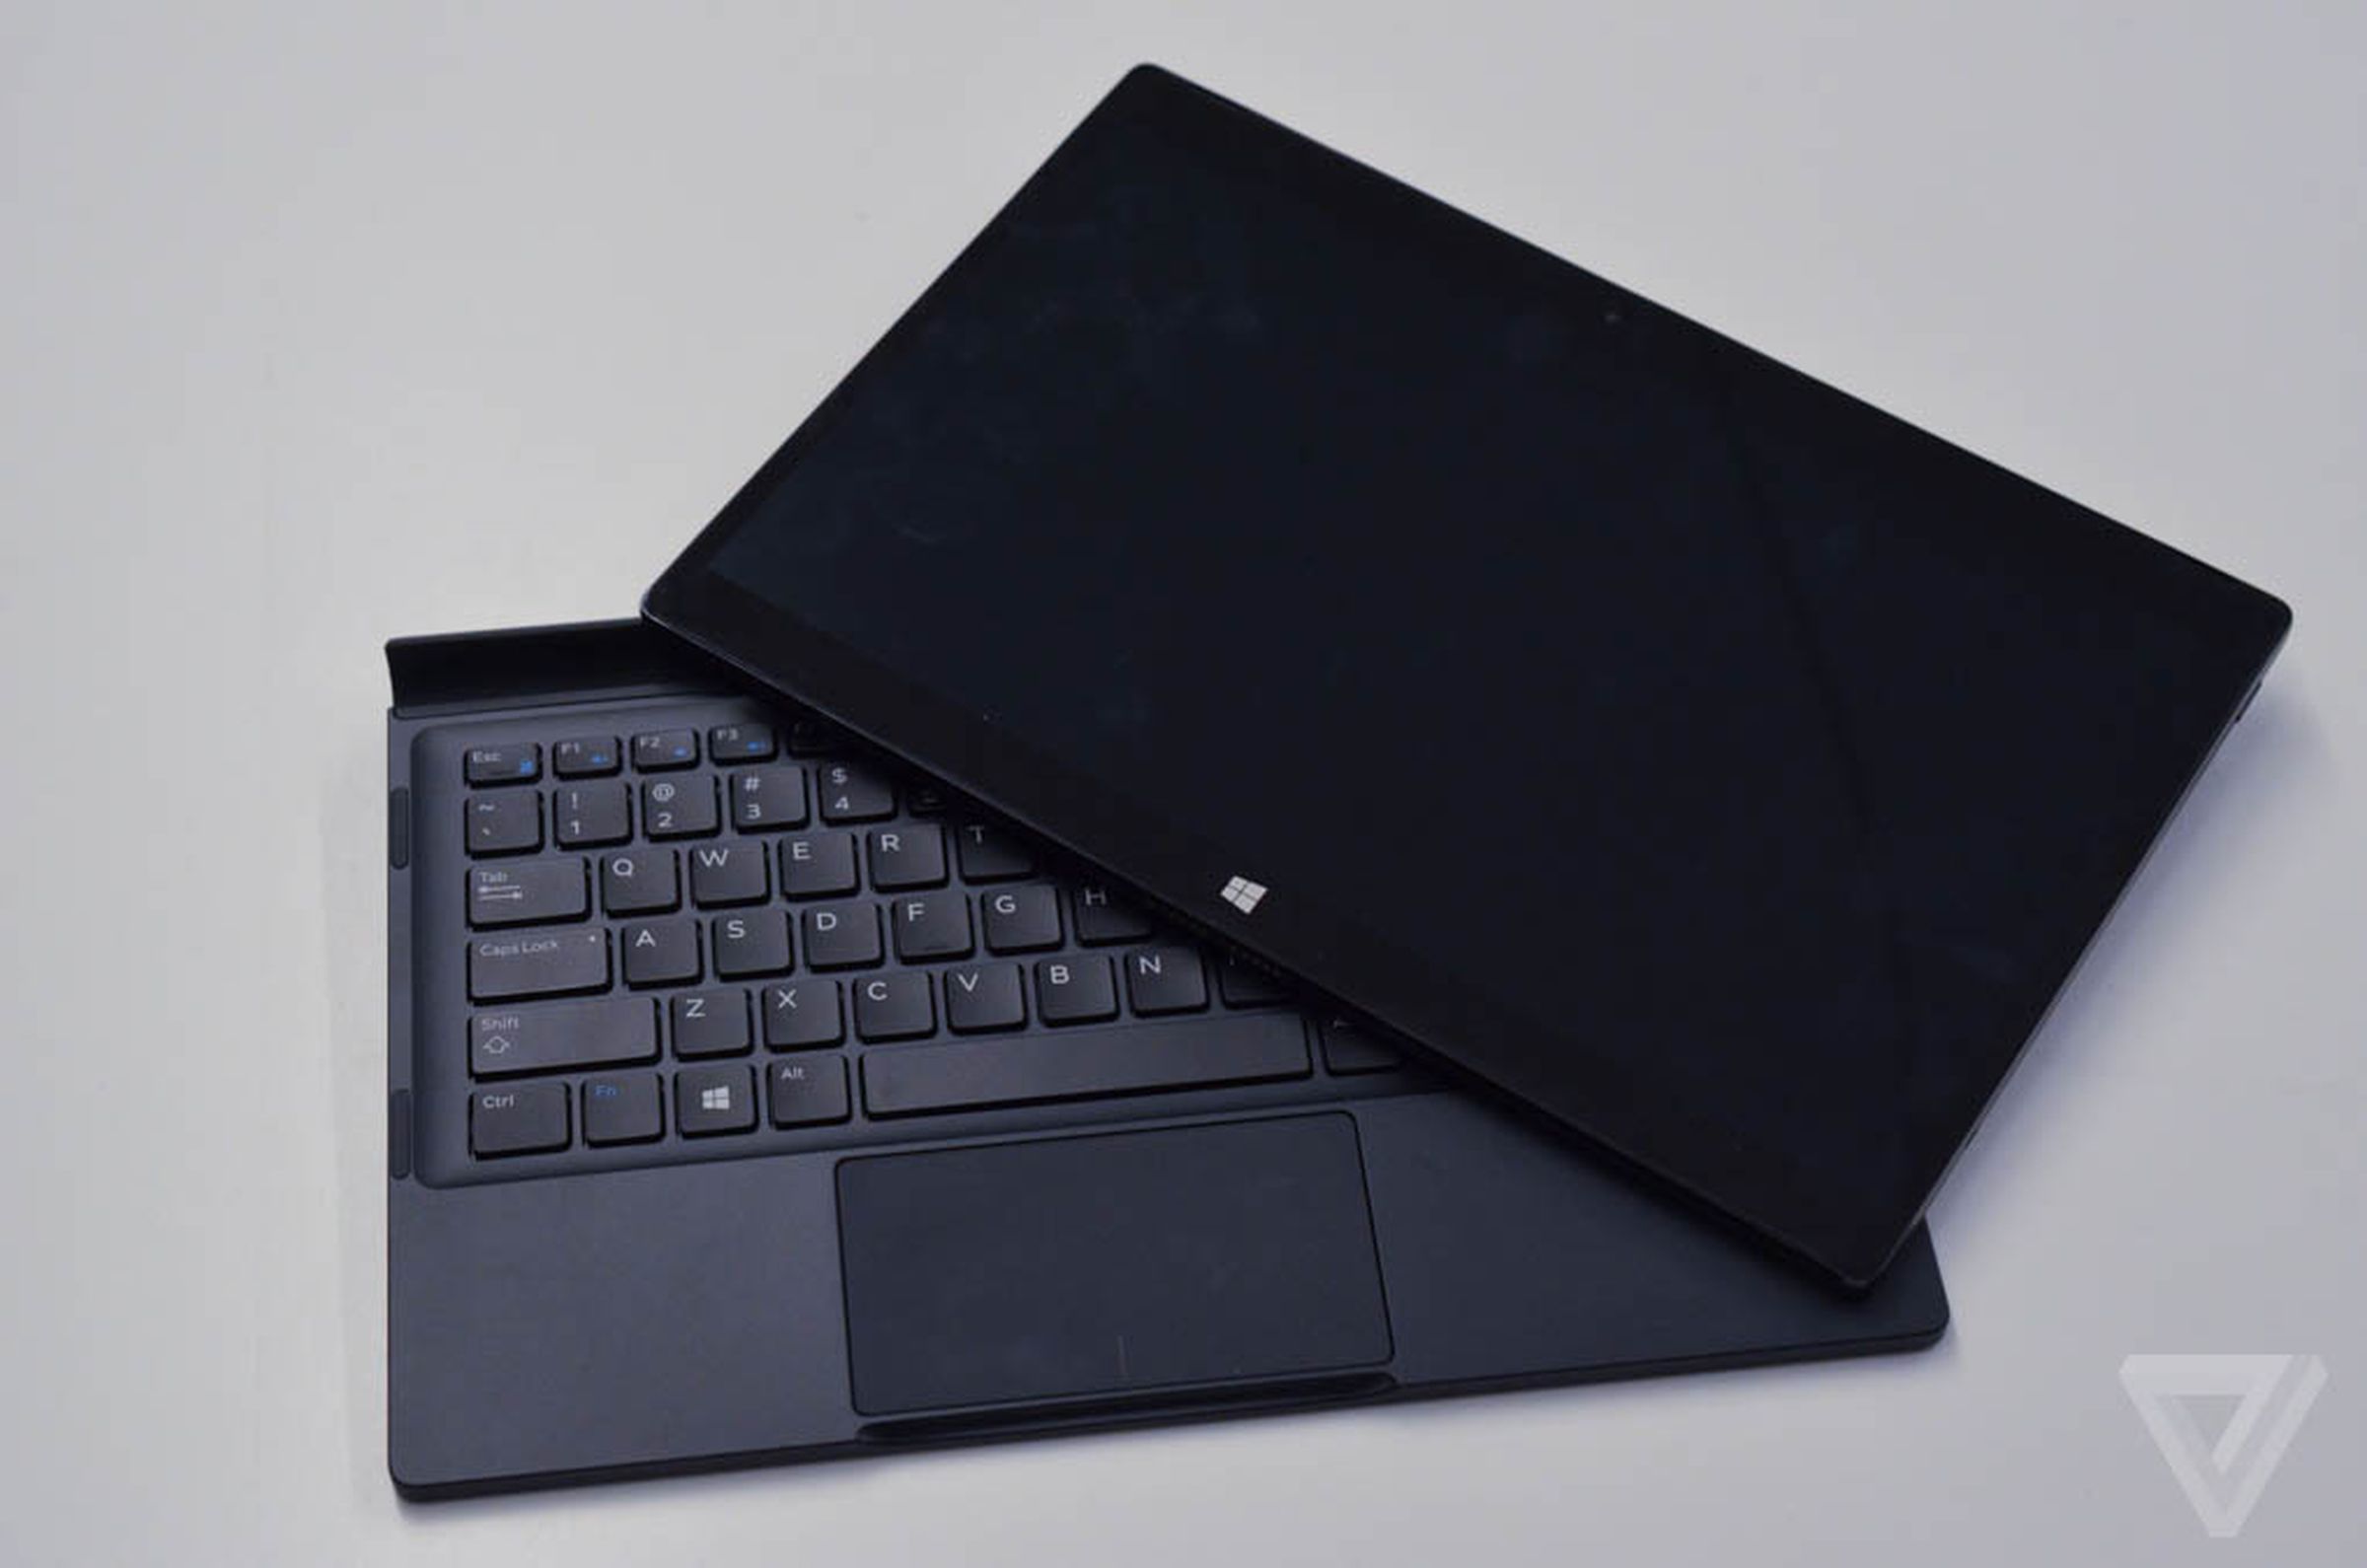 Dell XPS 12 (2015) hands-on photos